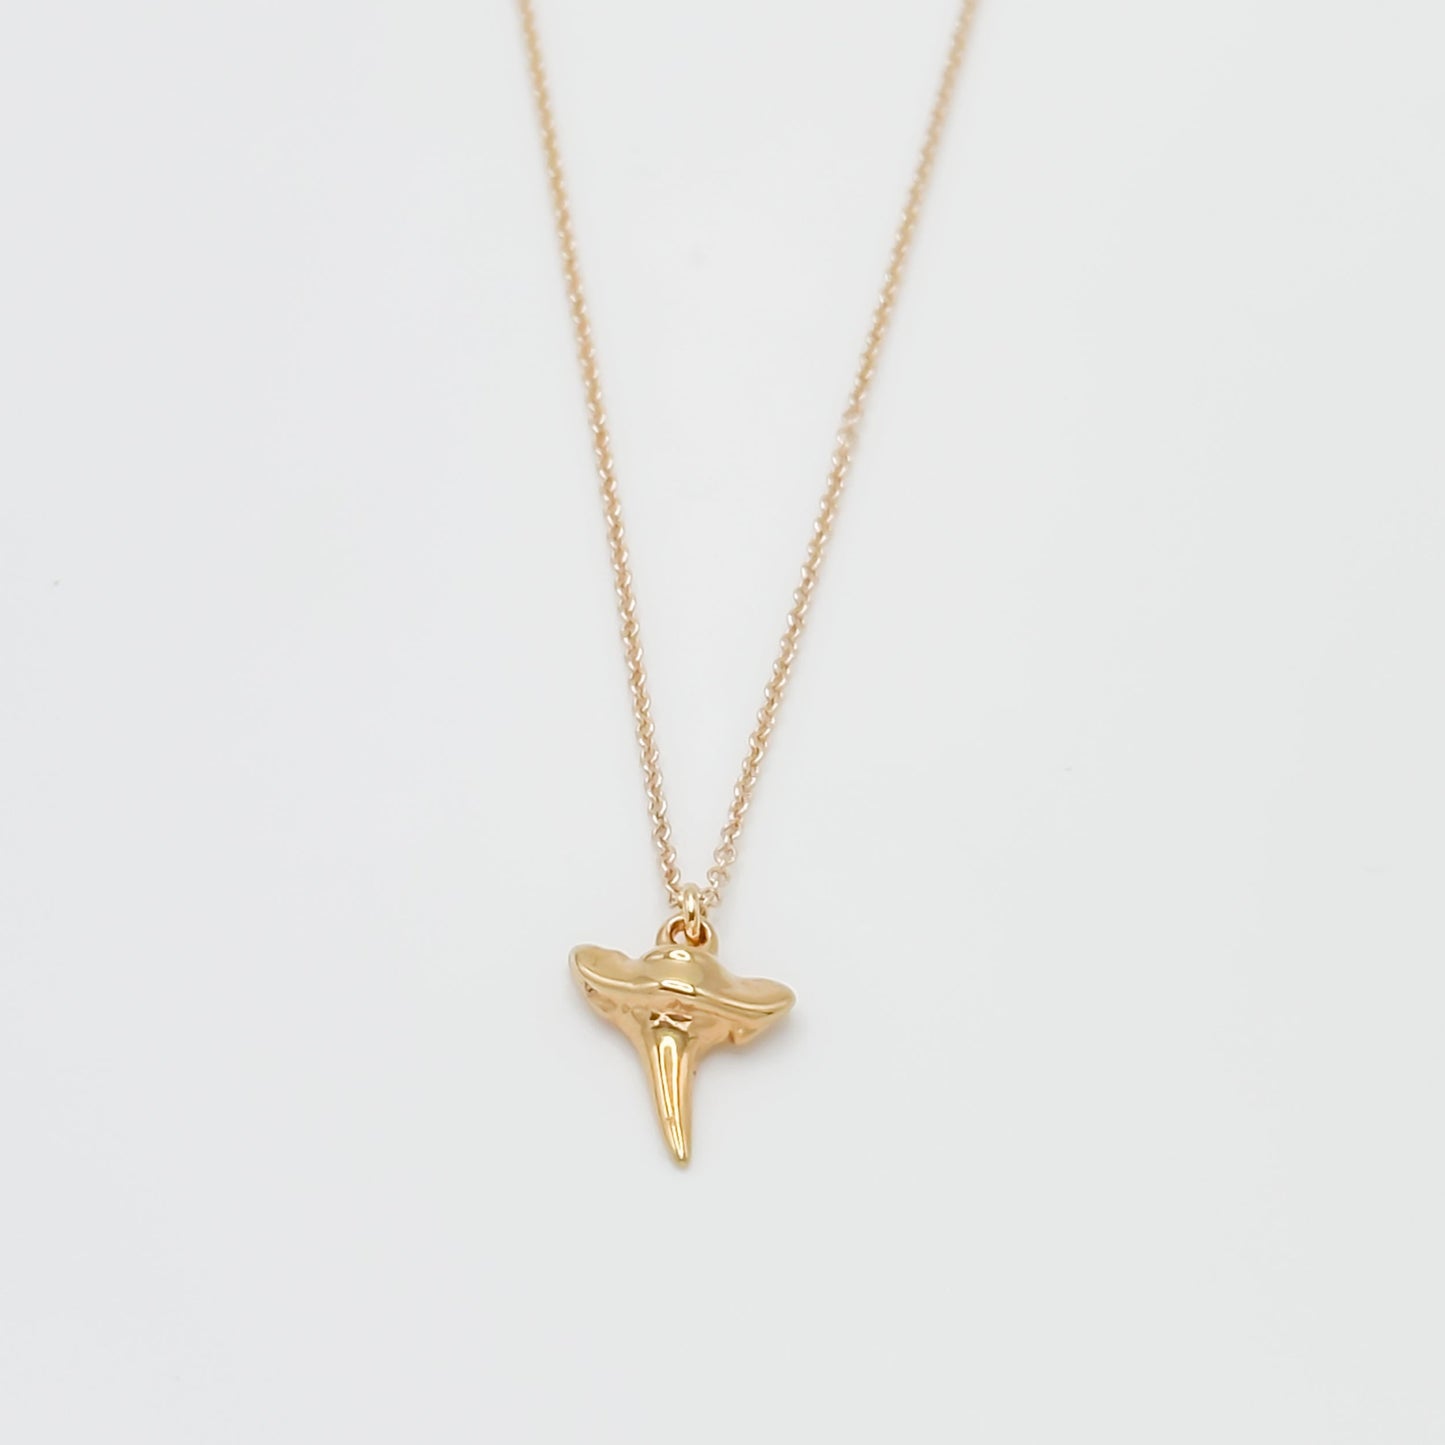 Baby Shark Necklace